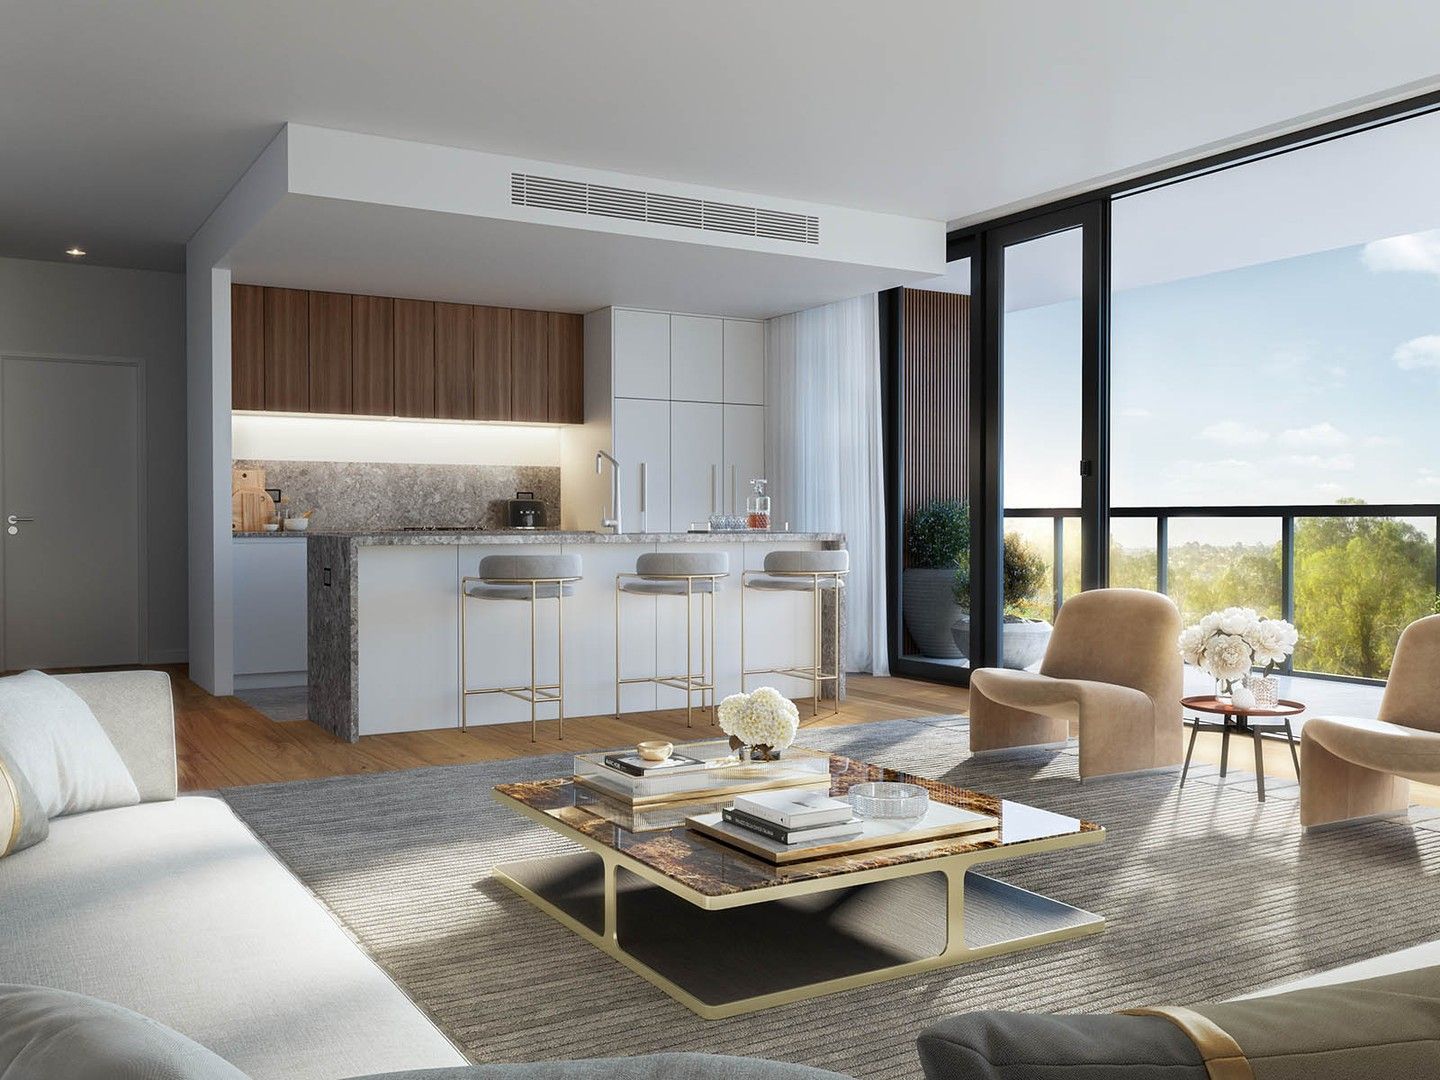 2 bedrooms New Apartments / Off the Plan in 106-116 Epsom Road ZETLAND NSW, 2017